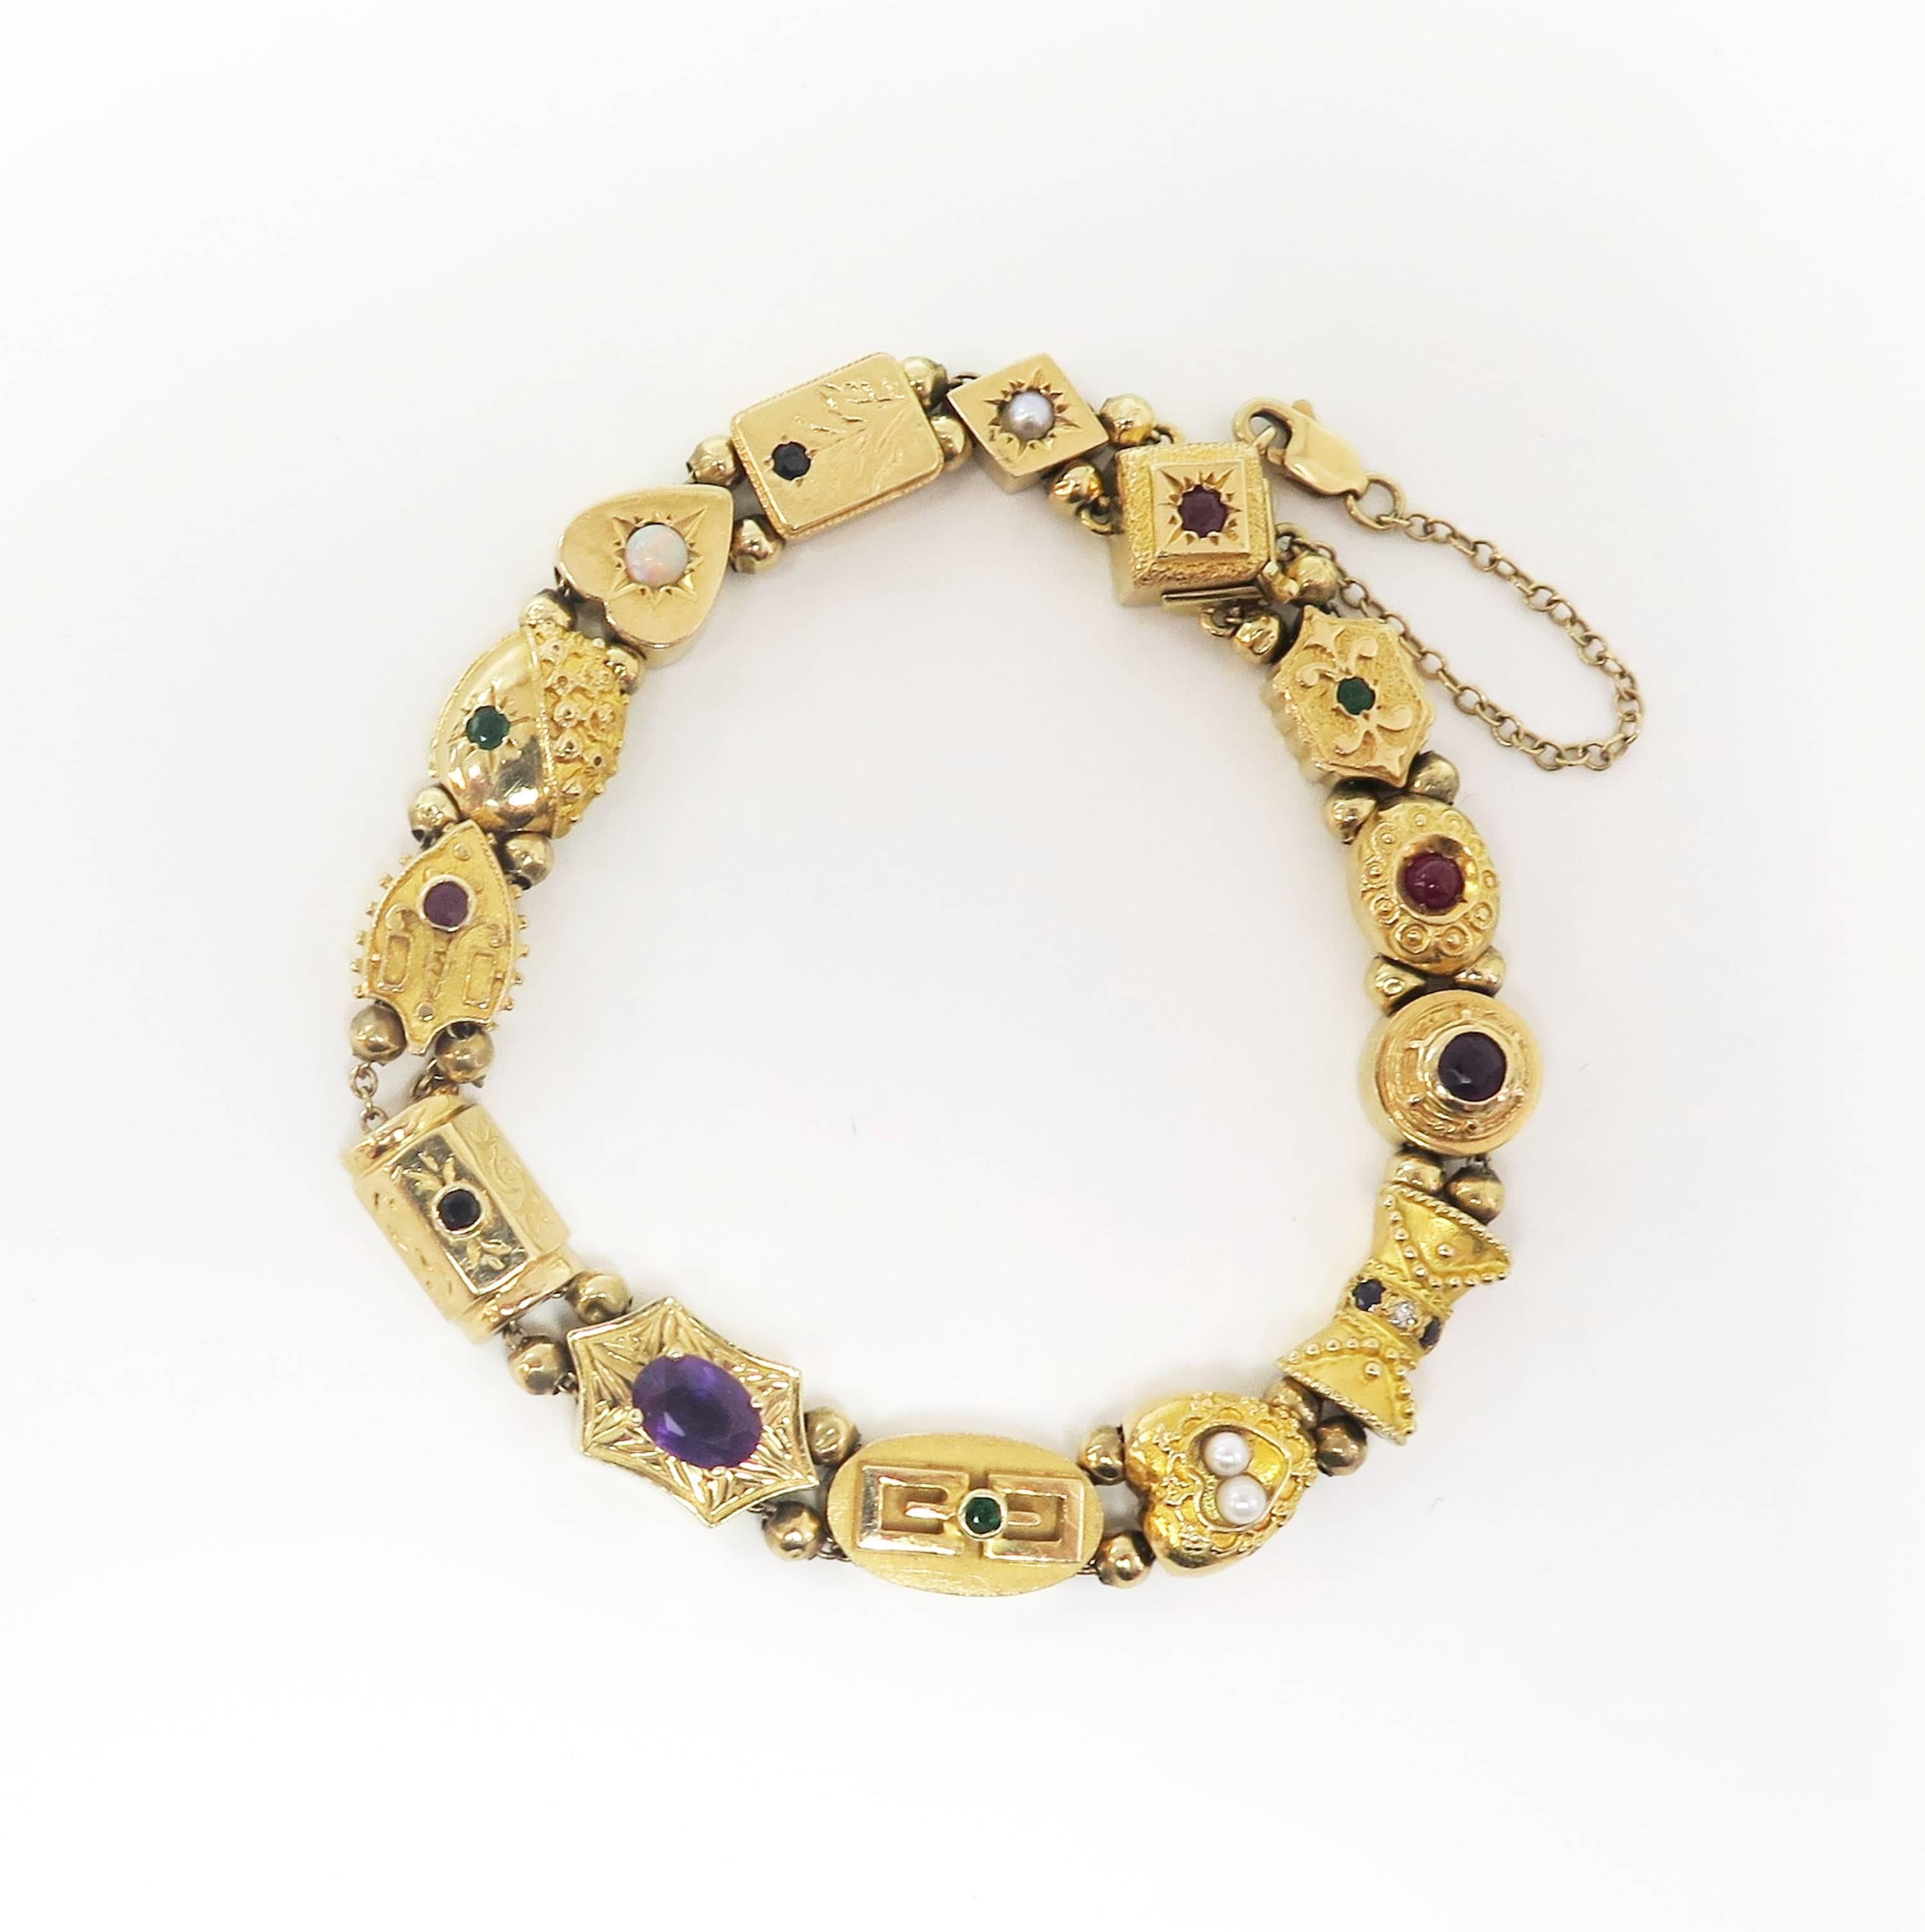 For a short time during the 1950s, nineteenth century Victorian style jewelry enjoyed a strong resurgence, and this classic slide bracelet is a striking example of the favored style. This 14 karat yellow gold bracelet is composed of 14 individual,